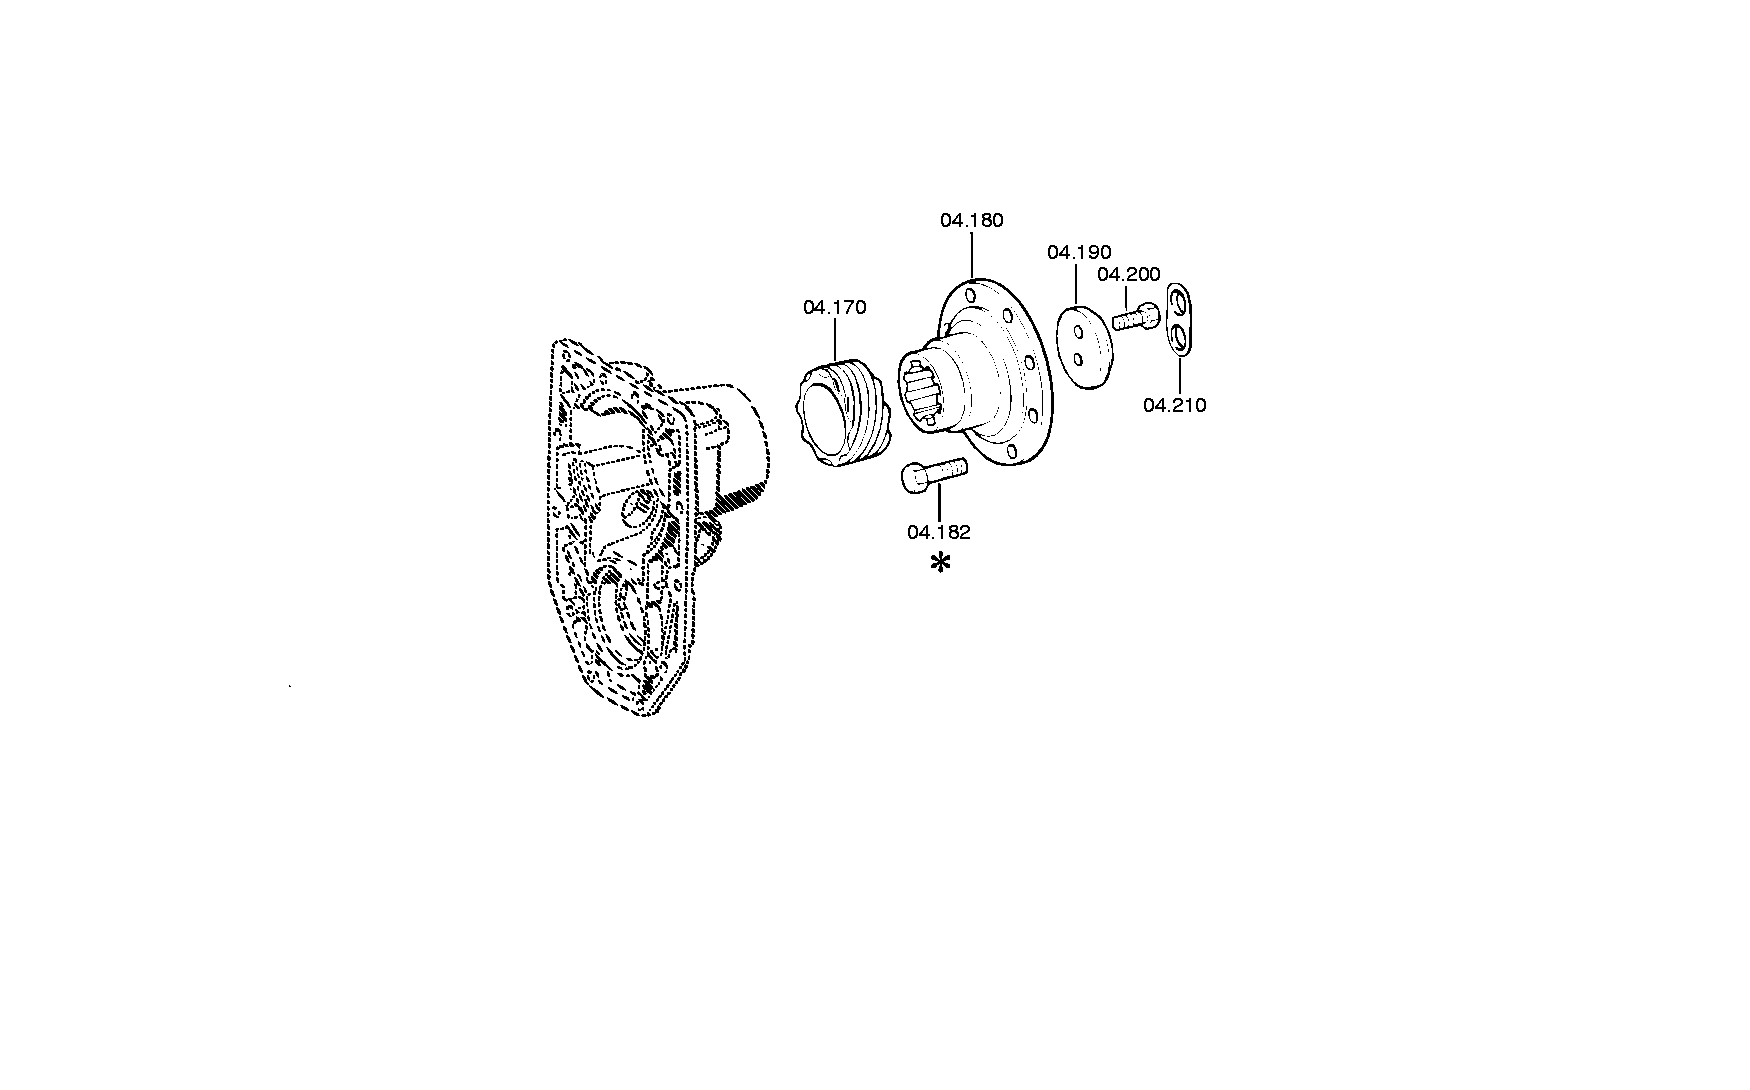 drawing for NEOPLAN BUS GMBH 050114601 - OUTPUT FLANGE (figure 1)